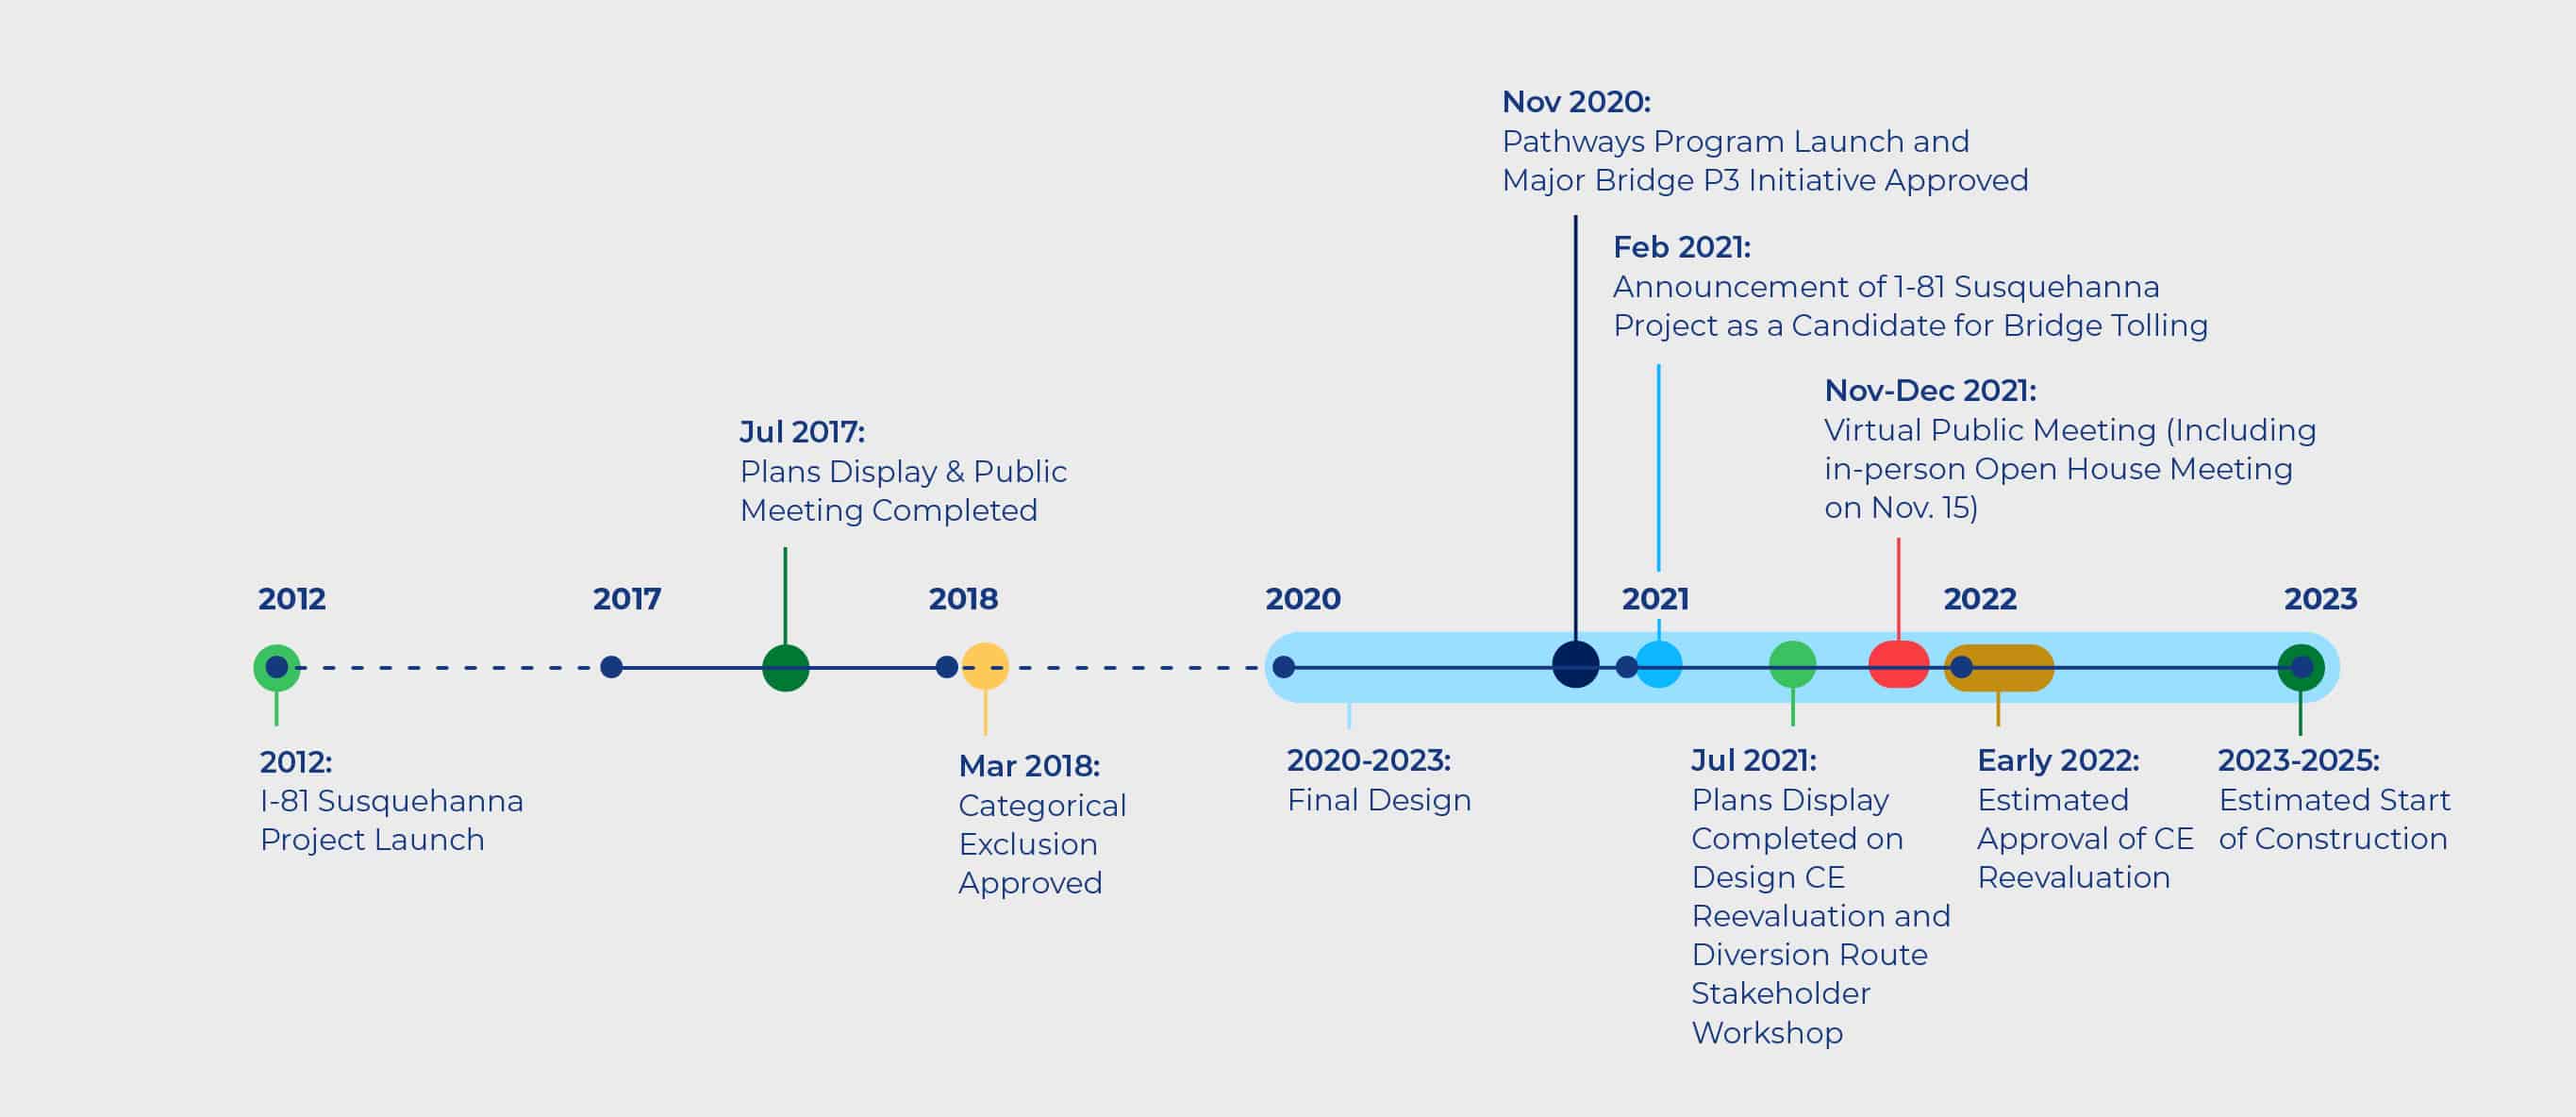 Timeline: Project launch in 2012. Plans display and public meeting completed in July 2017. Categorical Exclusion approved in March 2018. Final design in 2020-2023. Pathways Program launch and Major Bridge P3 Initiative approved in November 2020. Announcement of I-81 Susquehanna Project as a candidate for bridge tolling in February 2021. Plans display completed on Design CE Reevaluation and Diversion Route Stakeholder Workshop in July 2021. Virtual Public meeting (including in-person open house meeting on Nov. 15) in November-December 2021. Estimated approval of CE Reevaluation in early 2022. Estimated start of construction in 2023-2025.